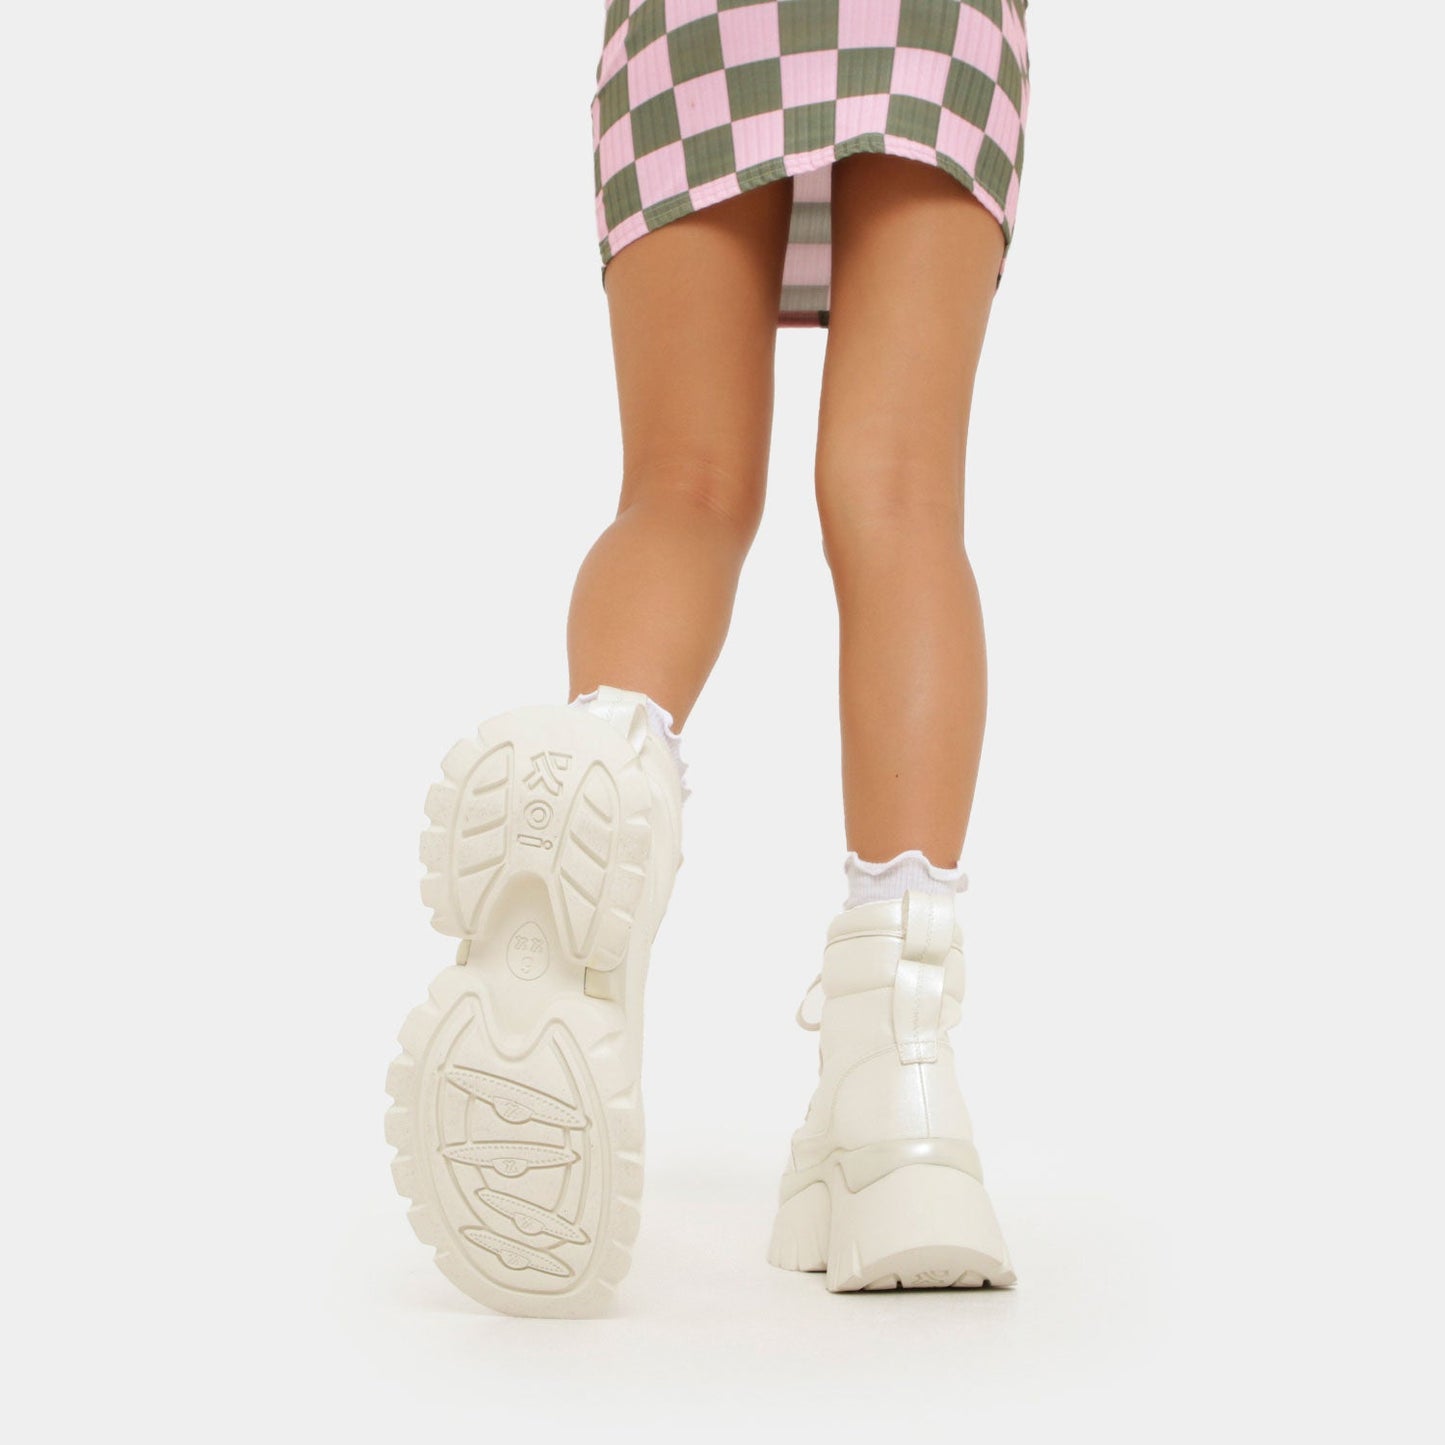 Gooey White Platform Boots - Ankle Boots - KOI Footwear - White - Model Sole View